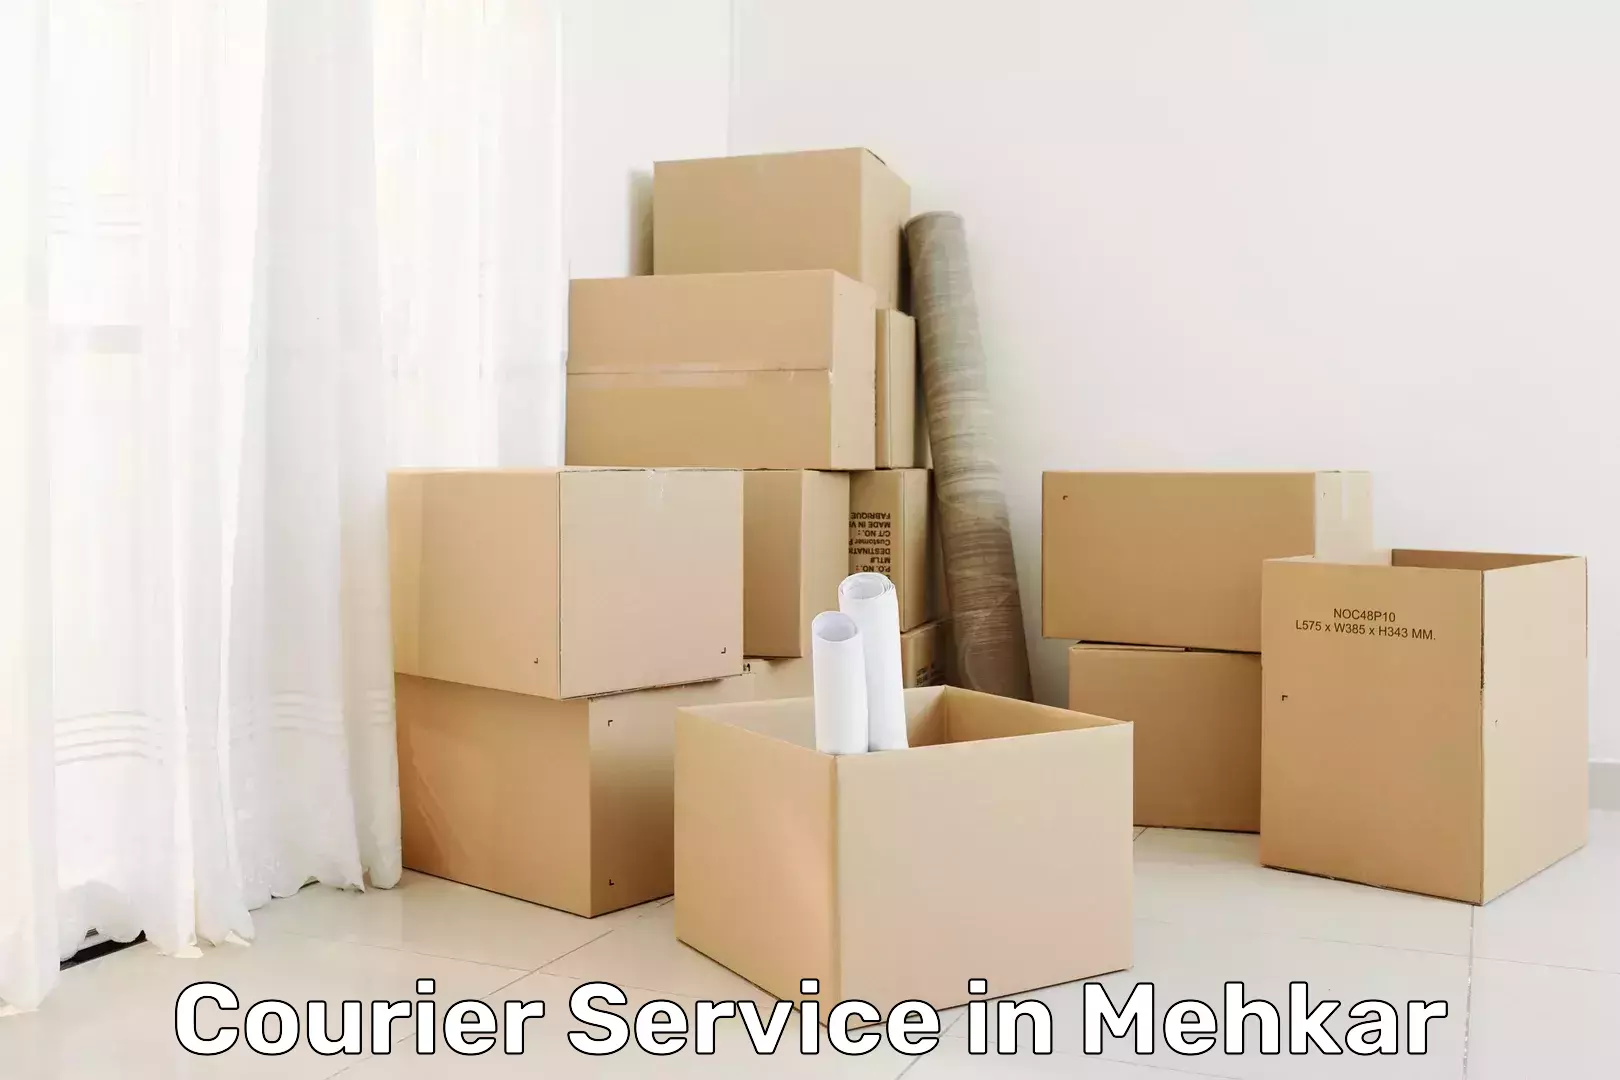 Automated shipping processes in Mehkar